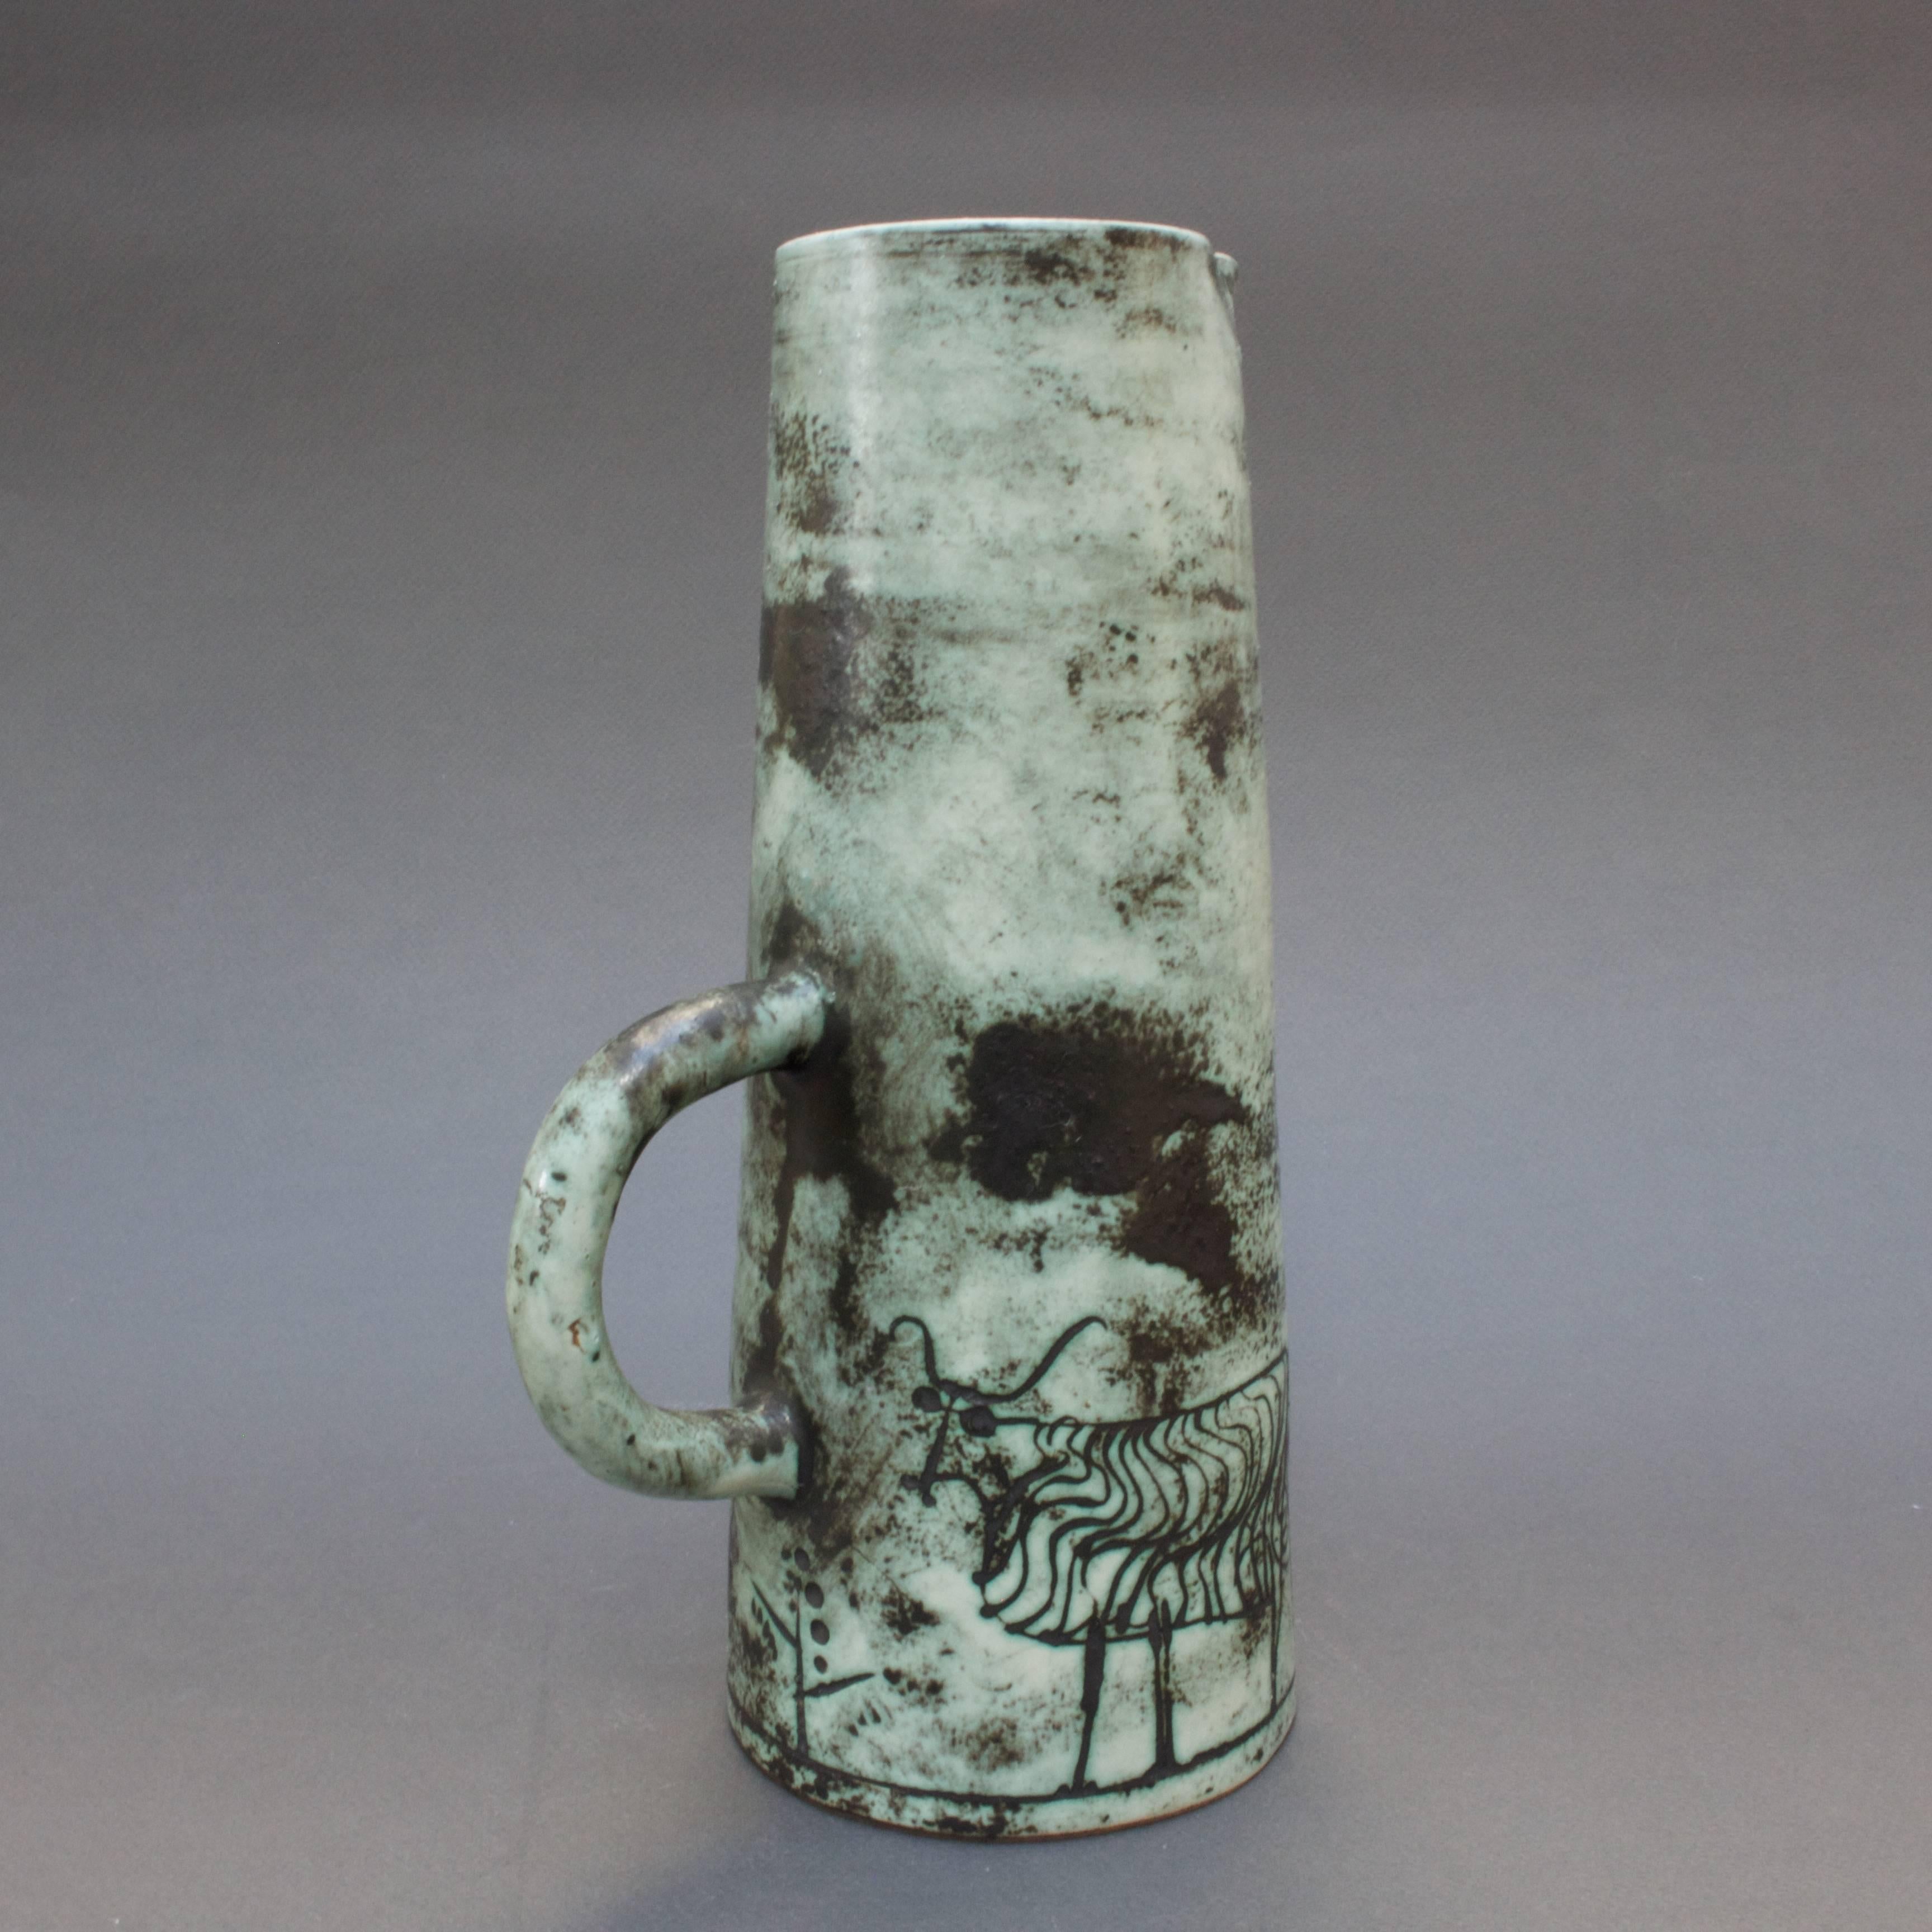 Ceramic Pitcher by Jacques Blin, Vallauris, France, circa 1950s - 60s 2